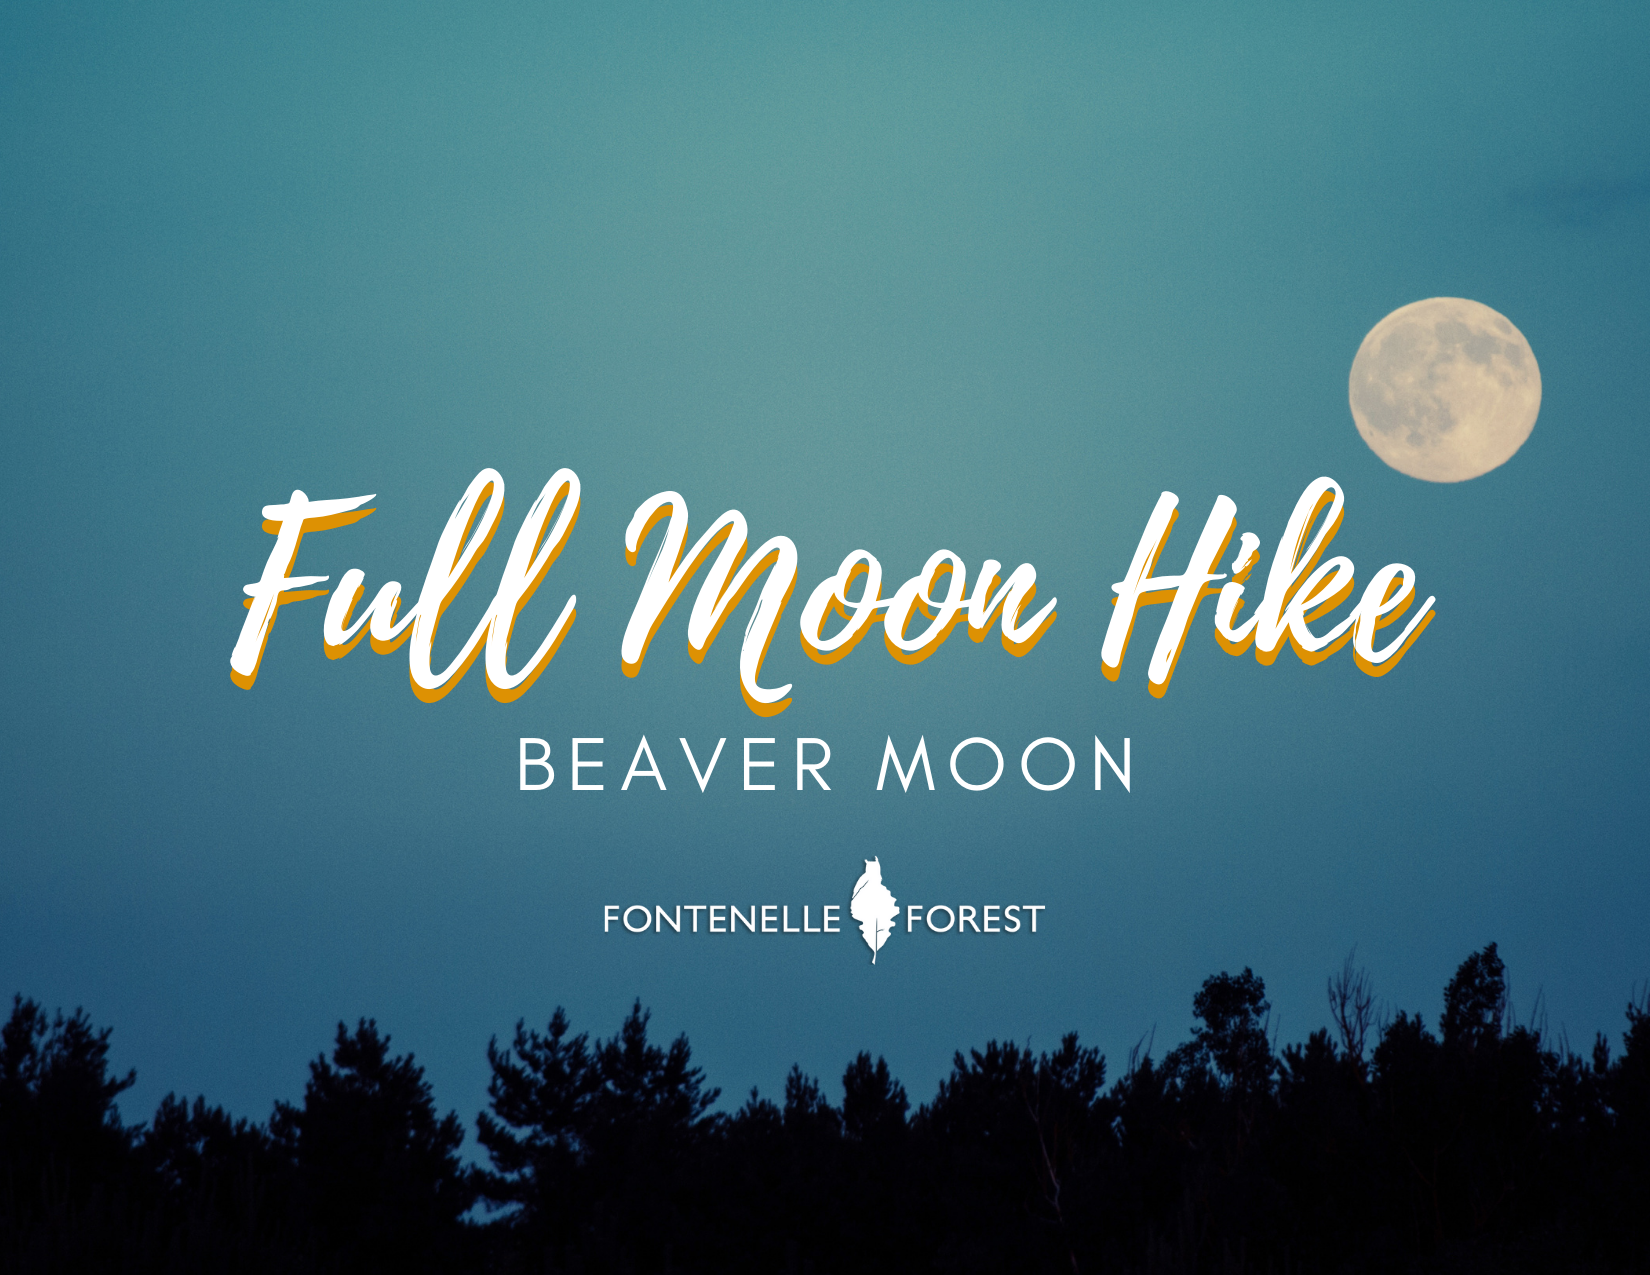 Pictures a dark blue sky at night with silhouettes of trees and a full moon. The text in cream is "Full Moon Hike" then on the next line "BEAVER MOON", with the Fontenelle Forest logo in white underneath.